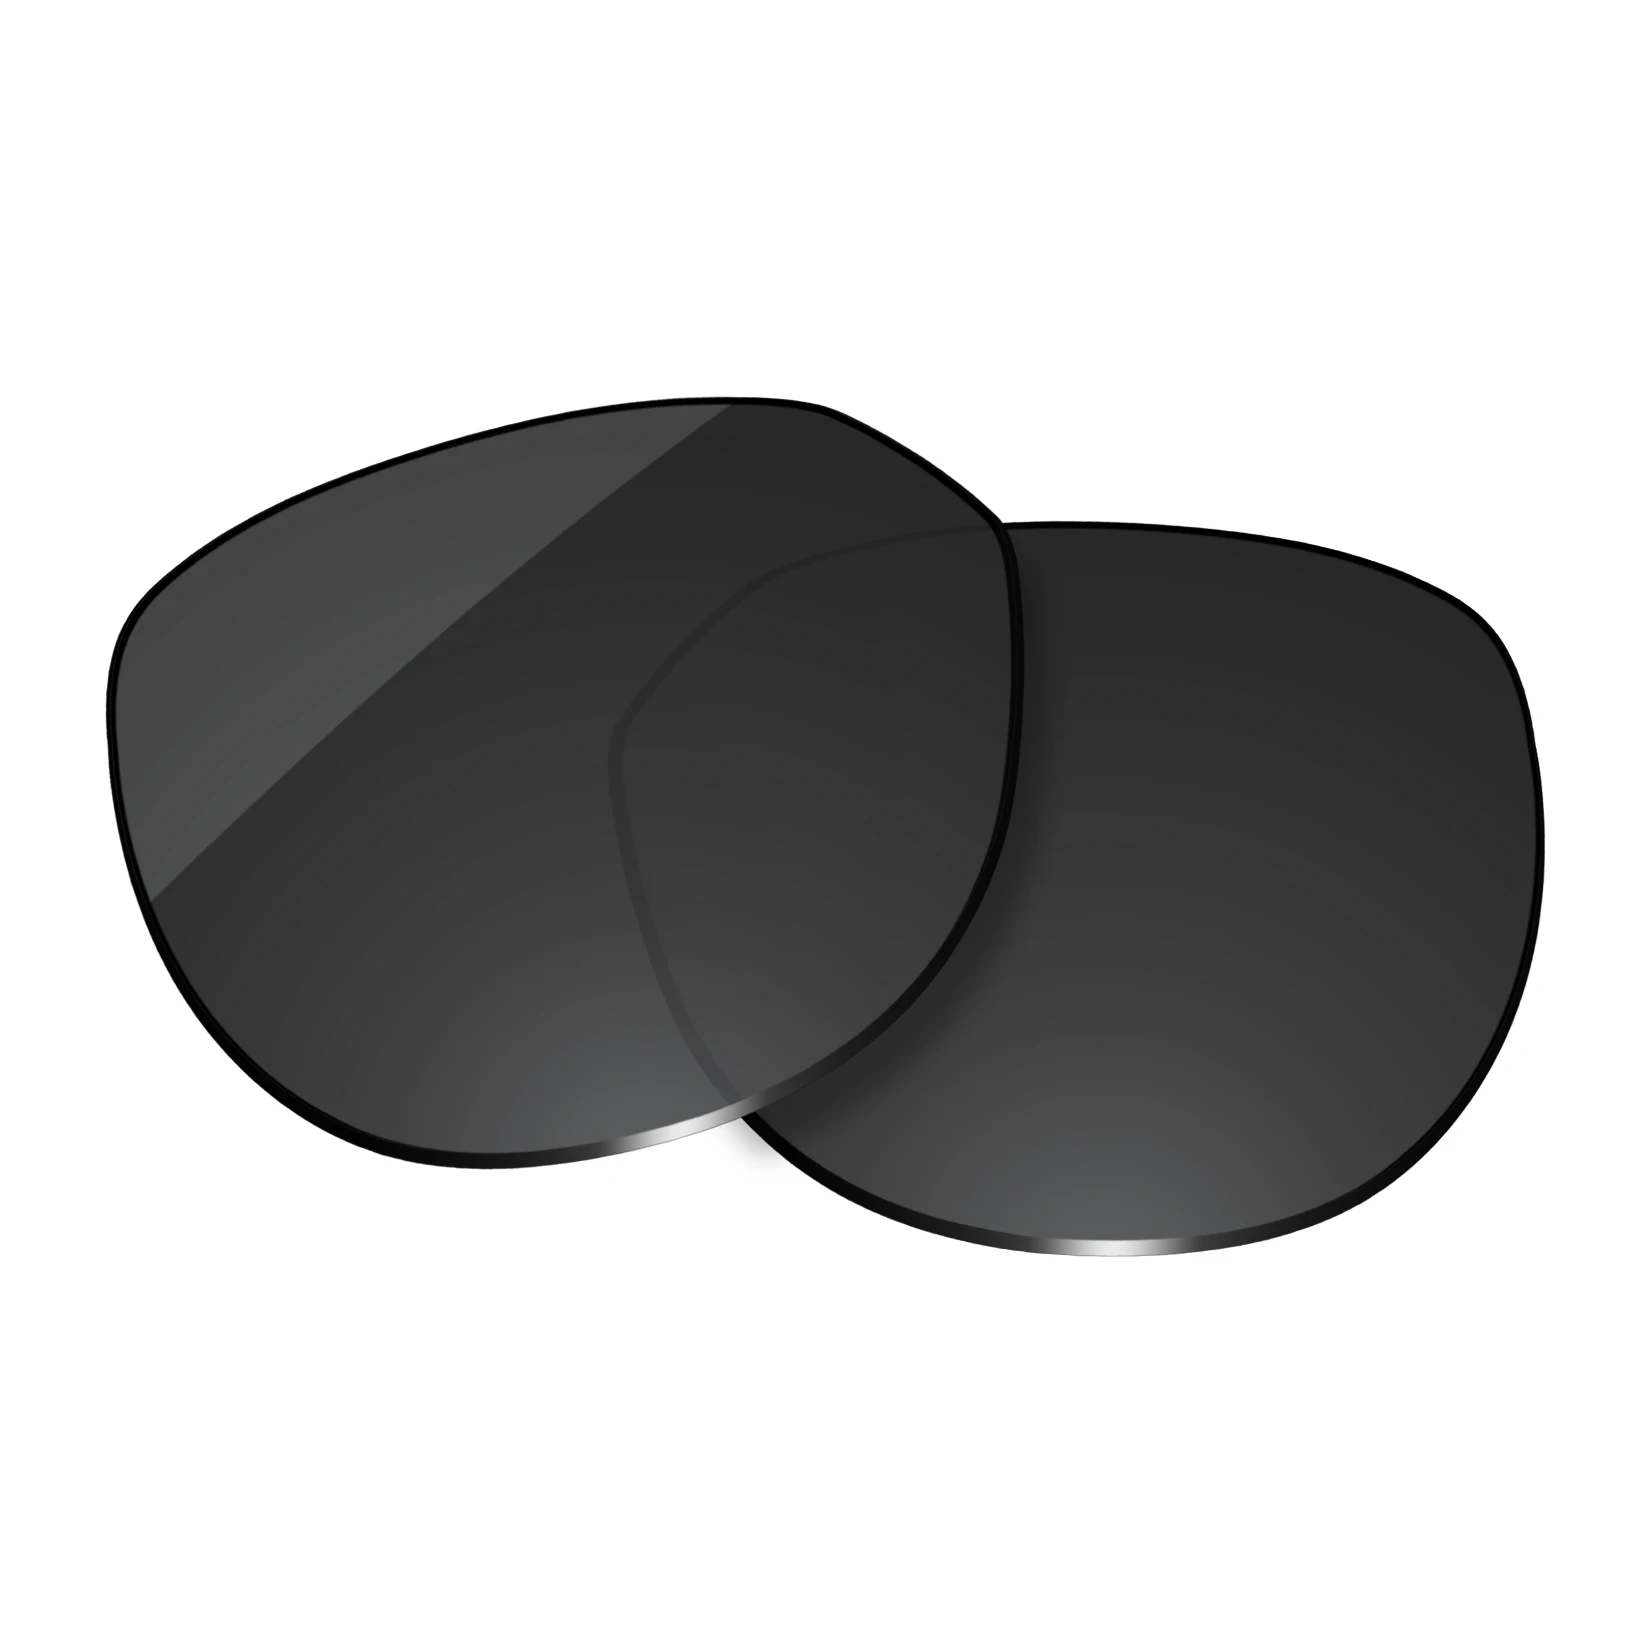 OOWLIT Polarized Replacement Lenses for-Oakley Latch Key L OO9394 Sunglasses (Lens Only)